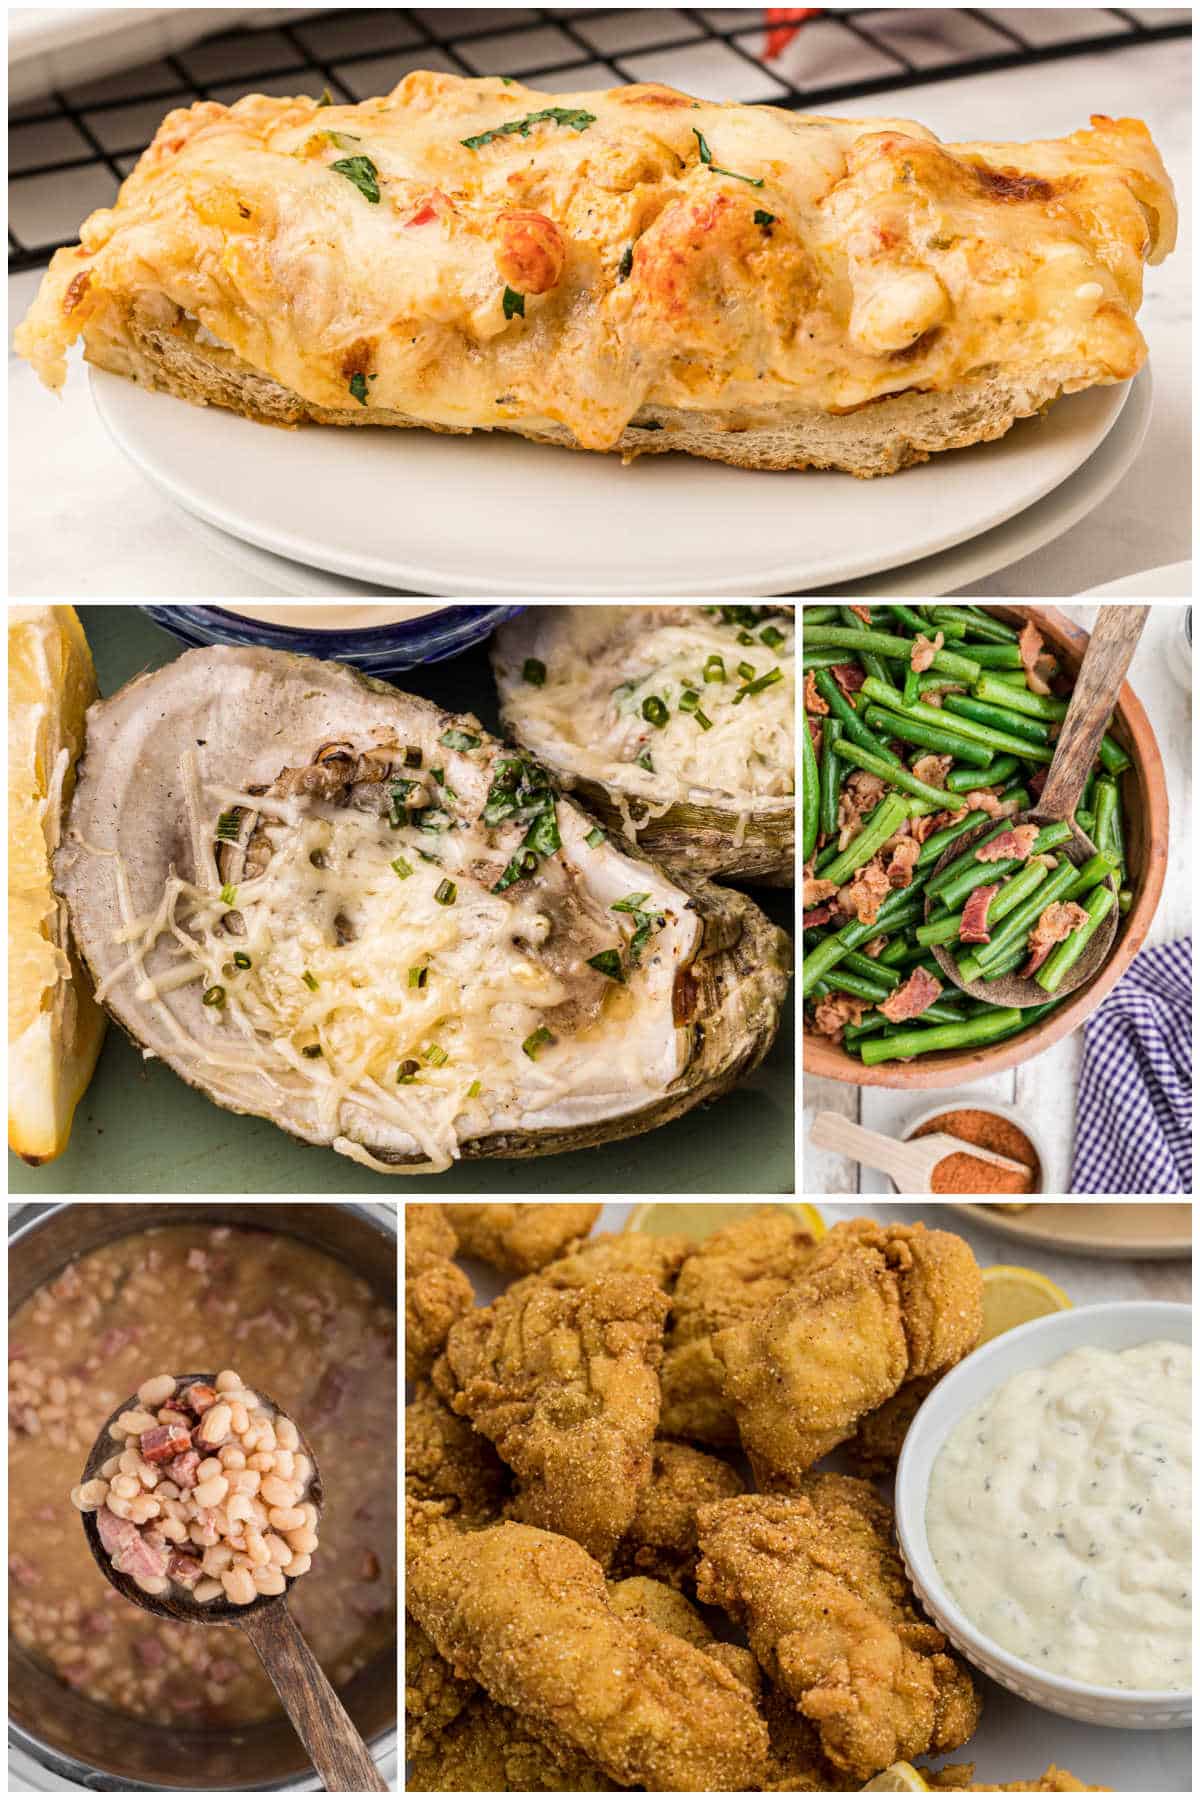 A collage of 5 images showing side dishes that would be good to serve with Jambalaya.